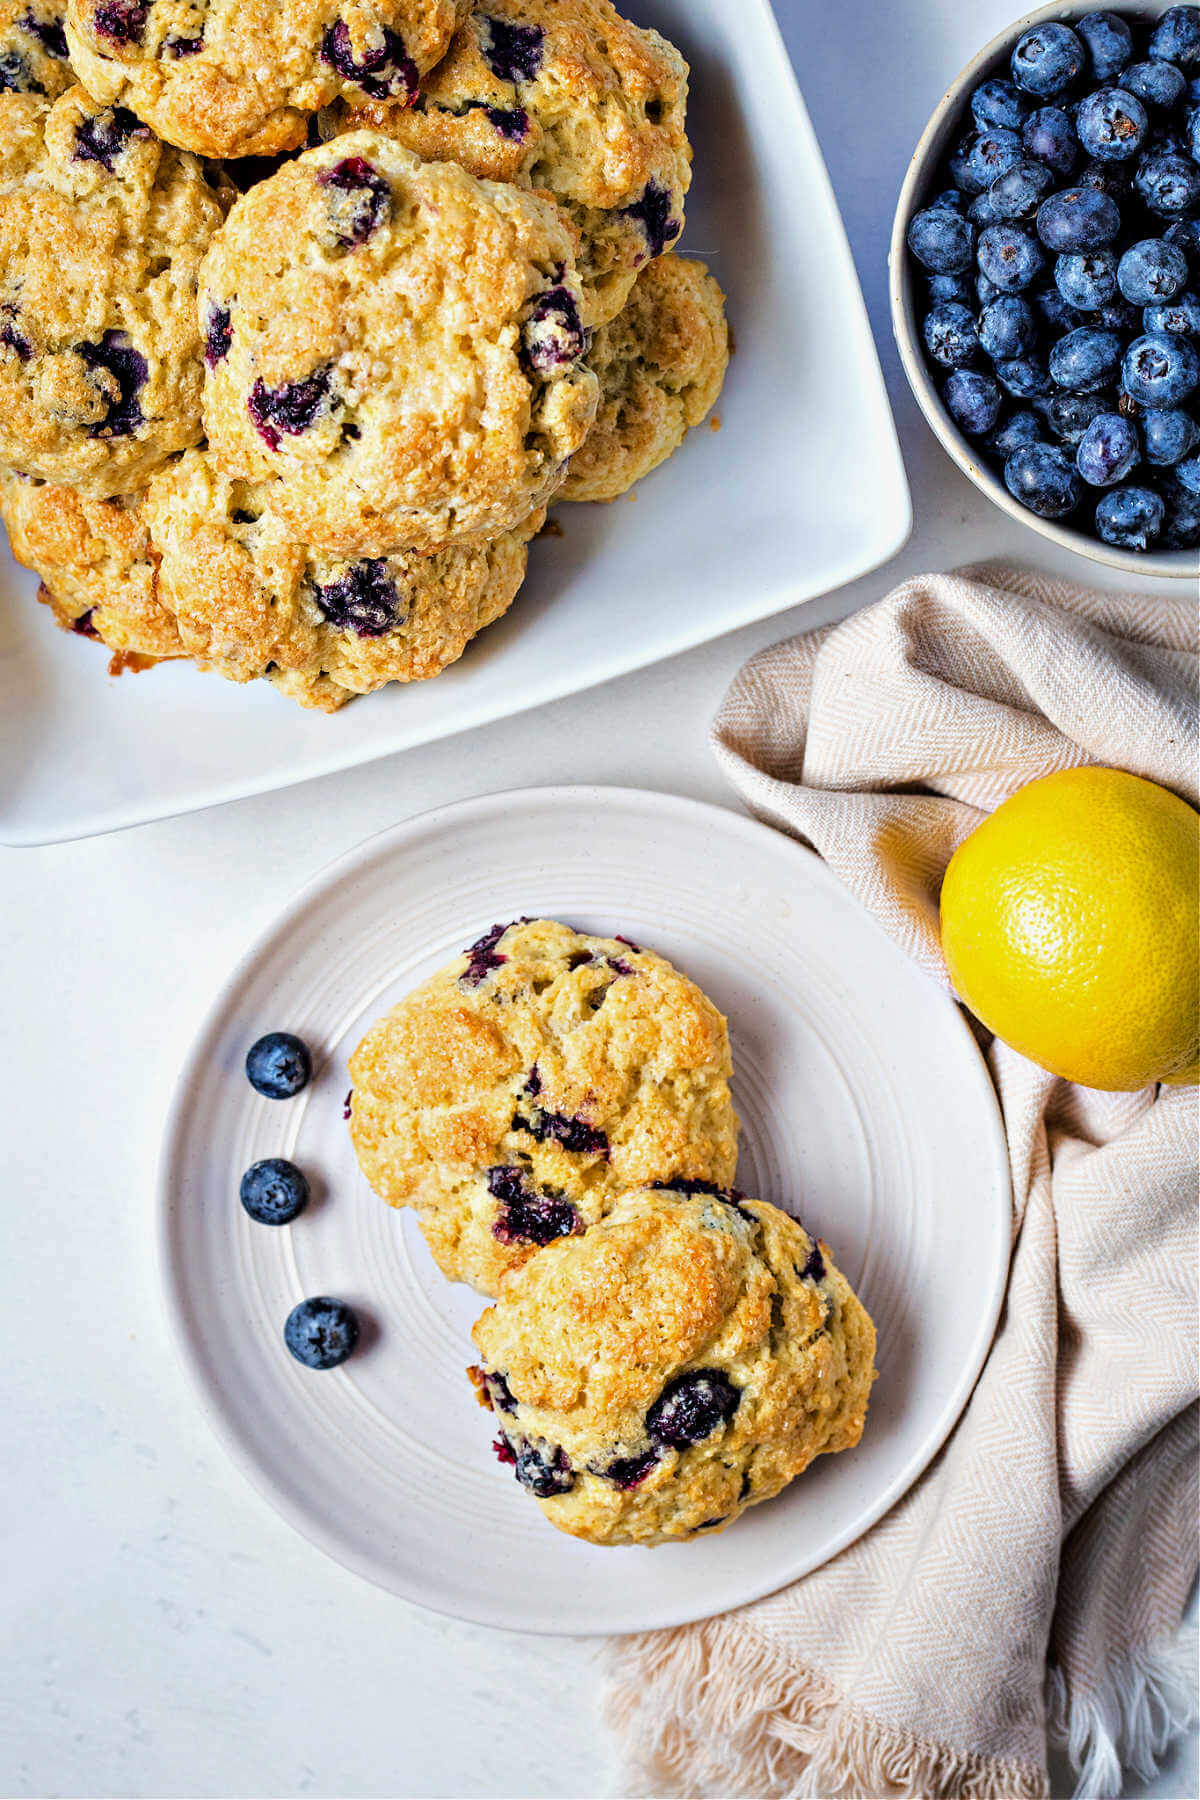 two blueberry scones on a plate with a bowl of blueberries and more scones in the background on a table.